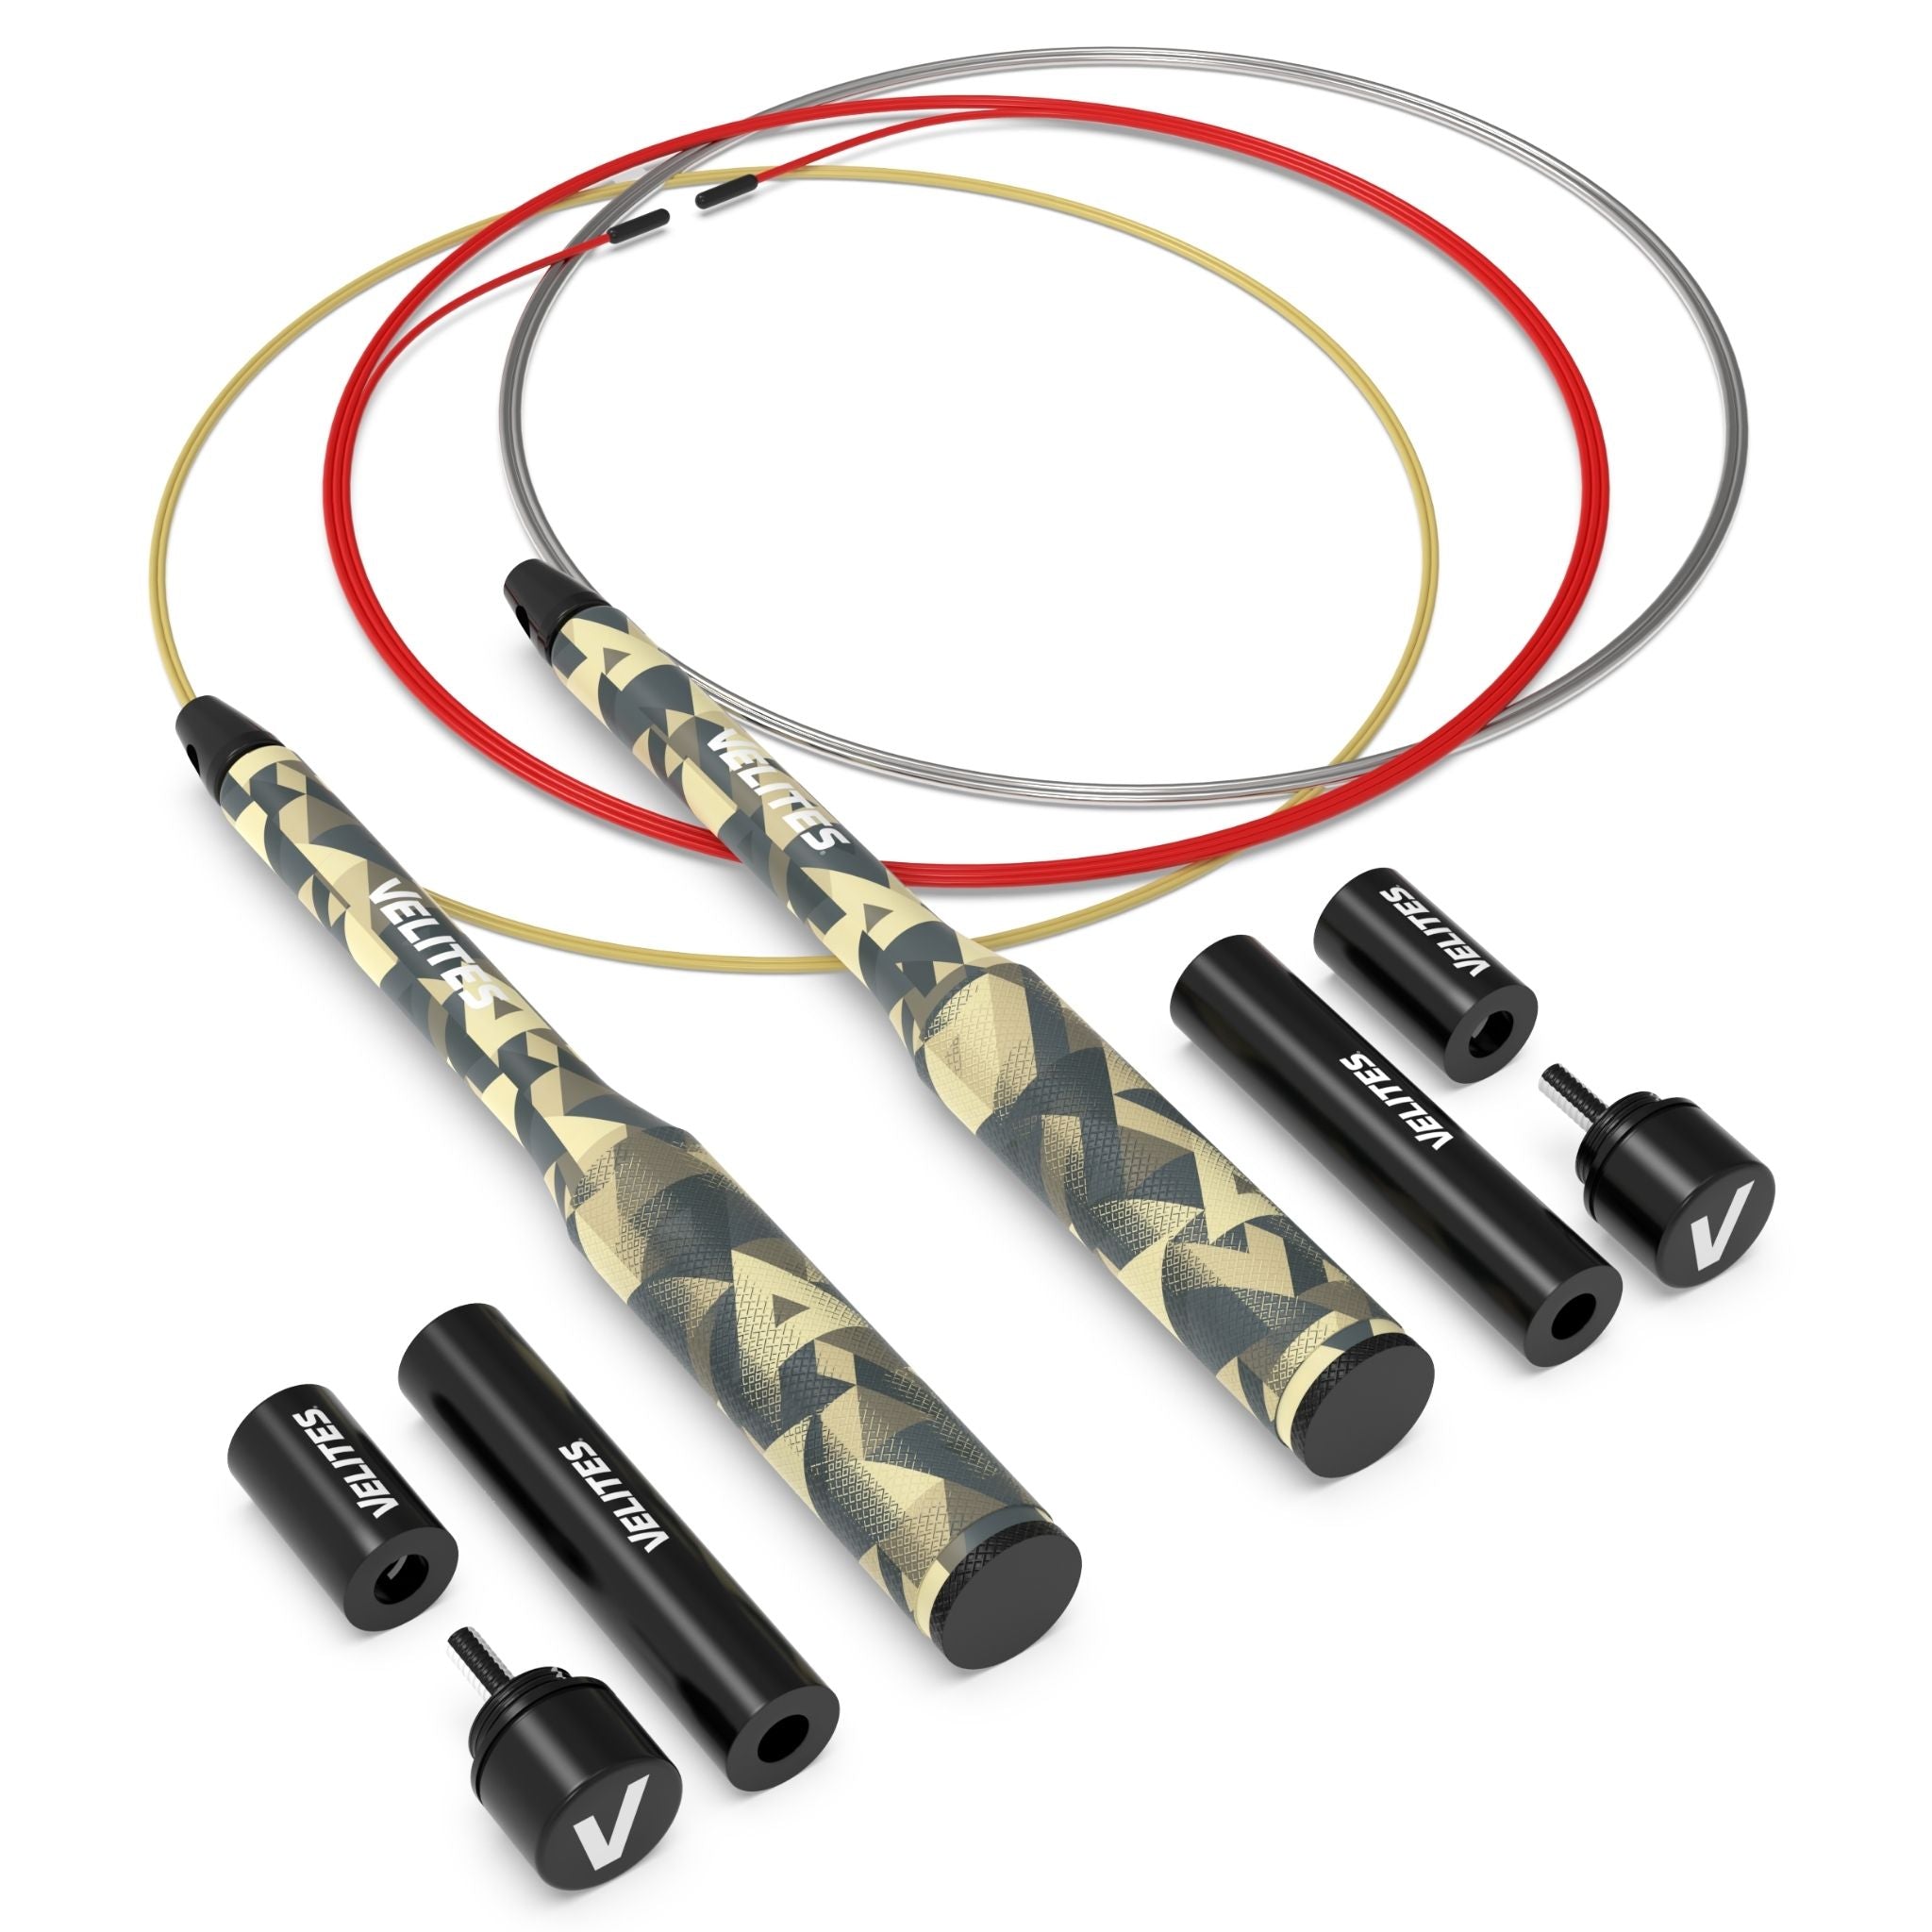 Pack Comba Fire 2.0 Velites + Lastres + Cables - camuflaje - 